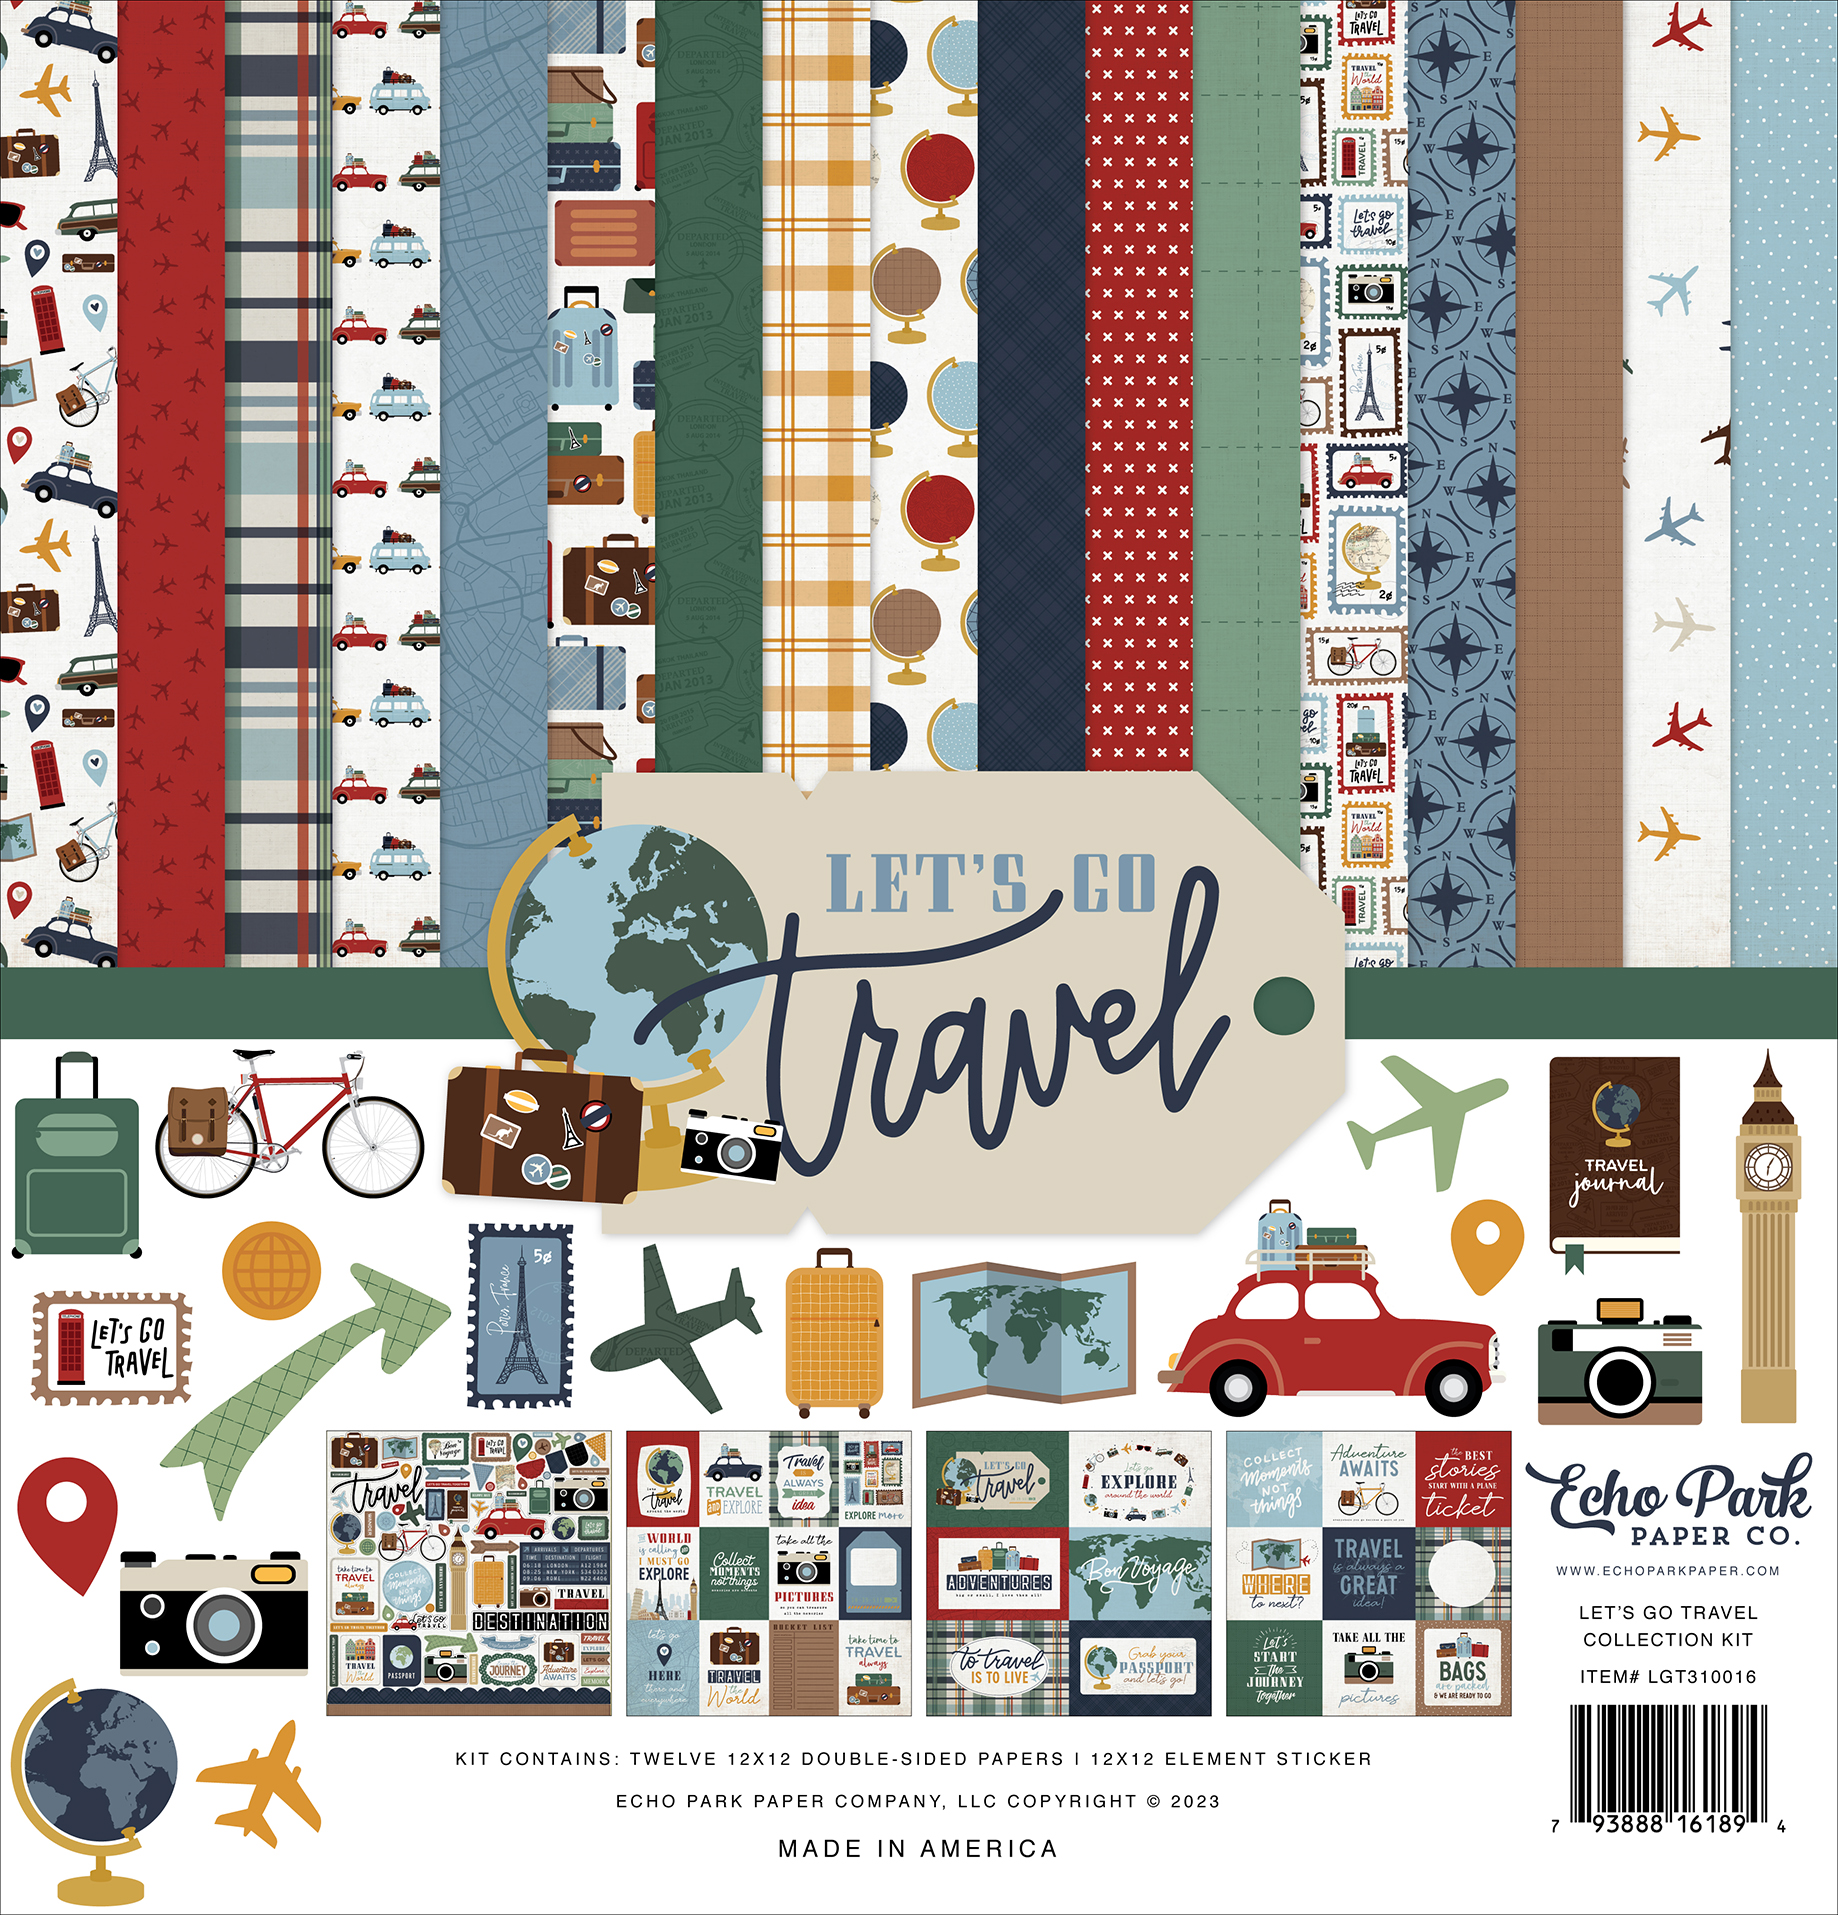 Getaway Collection Kit - Echo Park Paper Co.